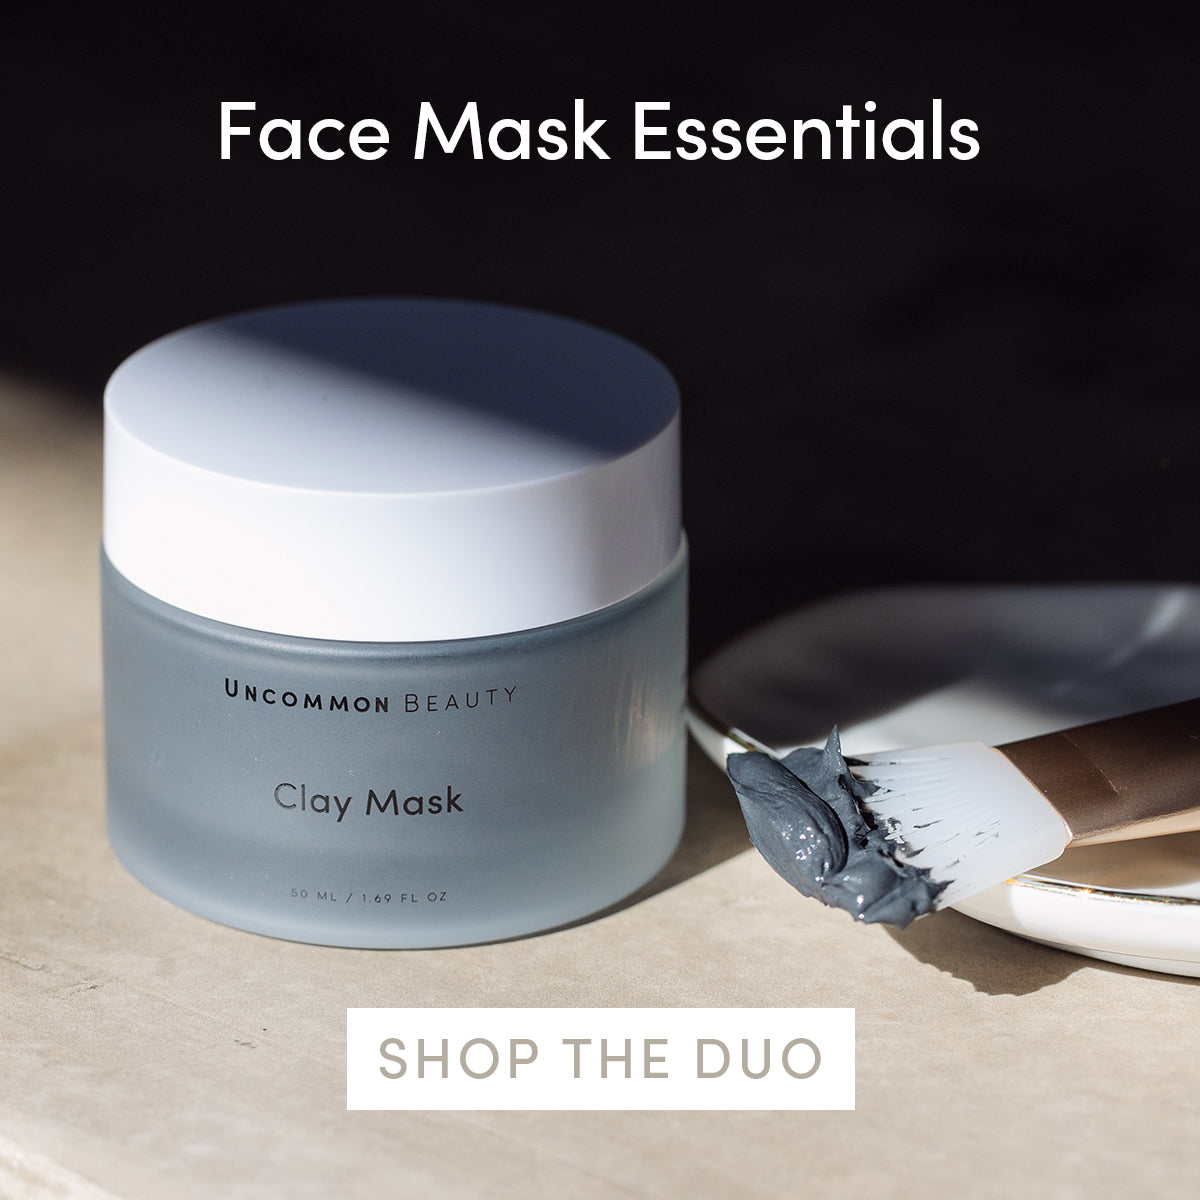 Face Mask Essentials | Shop the Duo | Uncommon Beauty